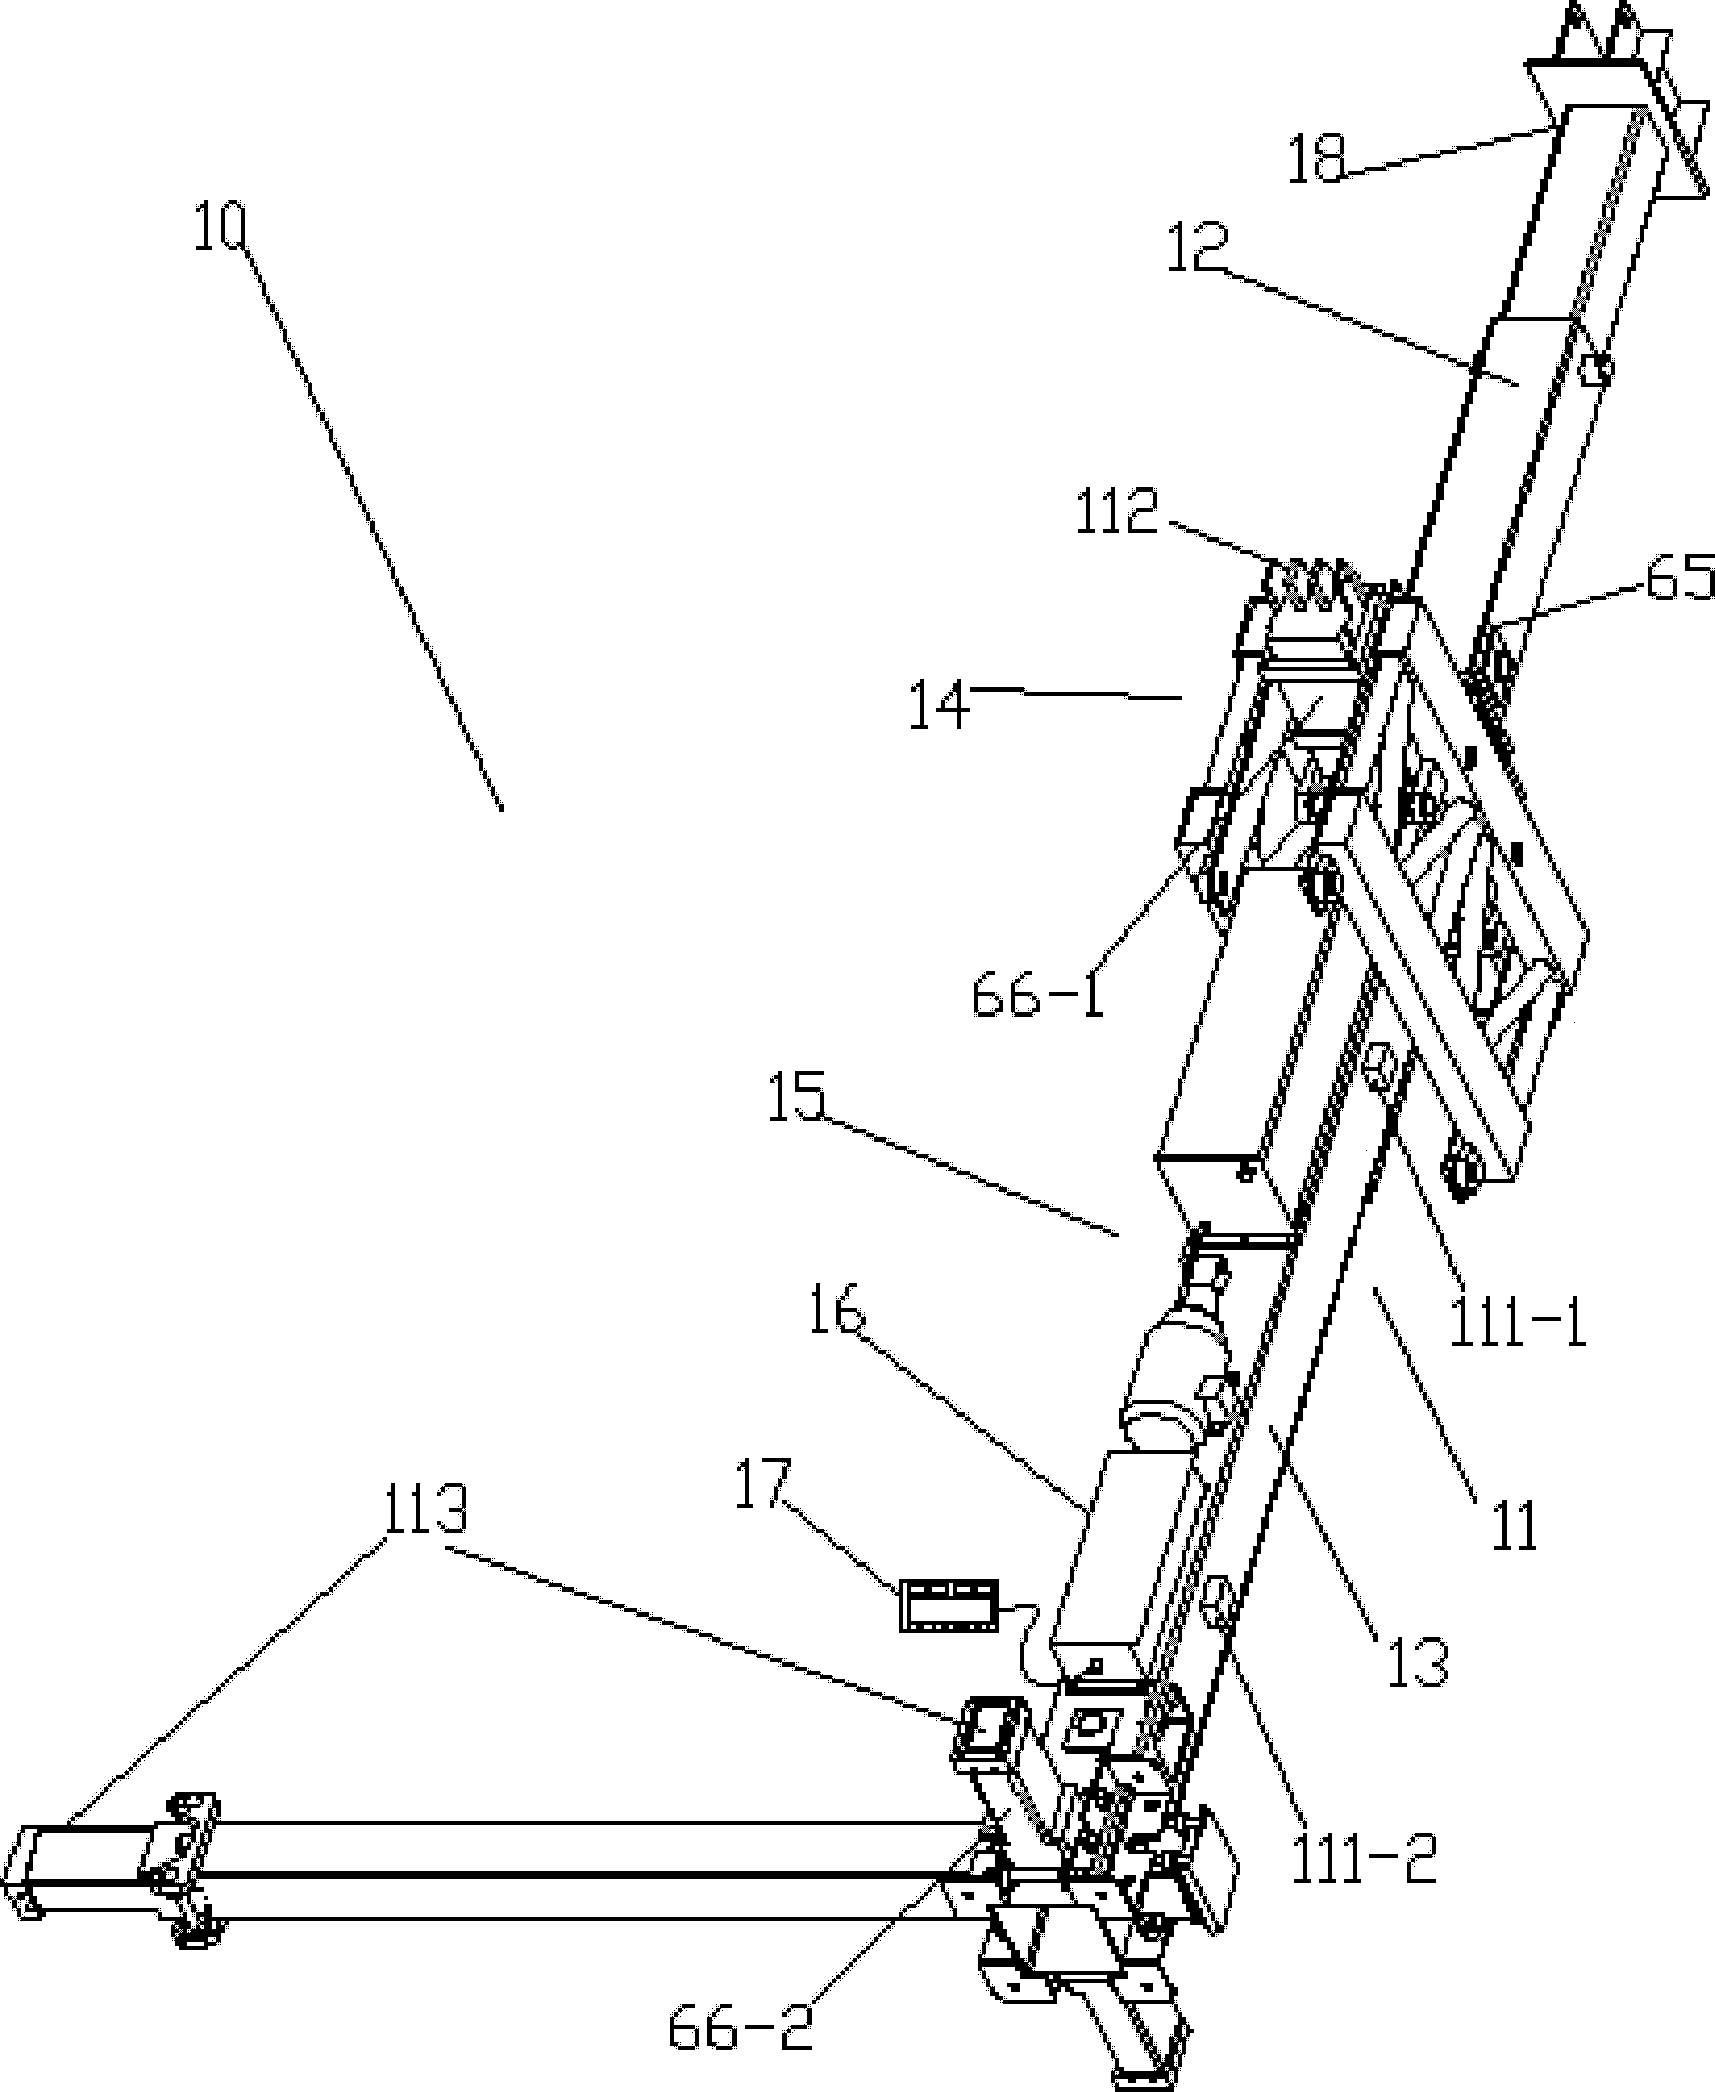 Hydraulic lifting self-ascending template system of intelligent independent unit structure